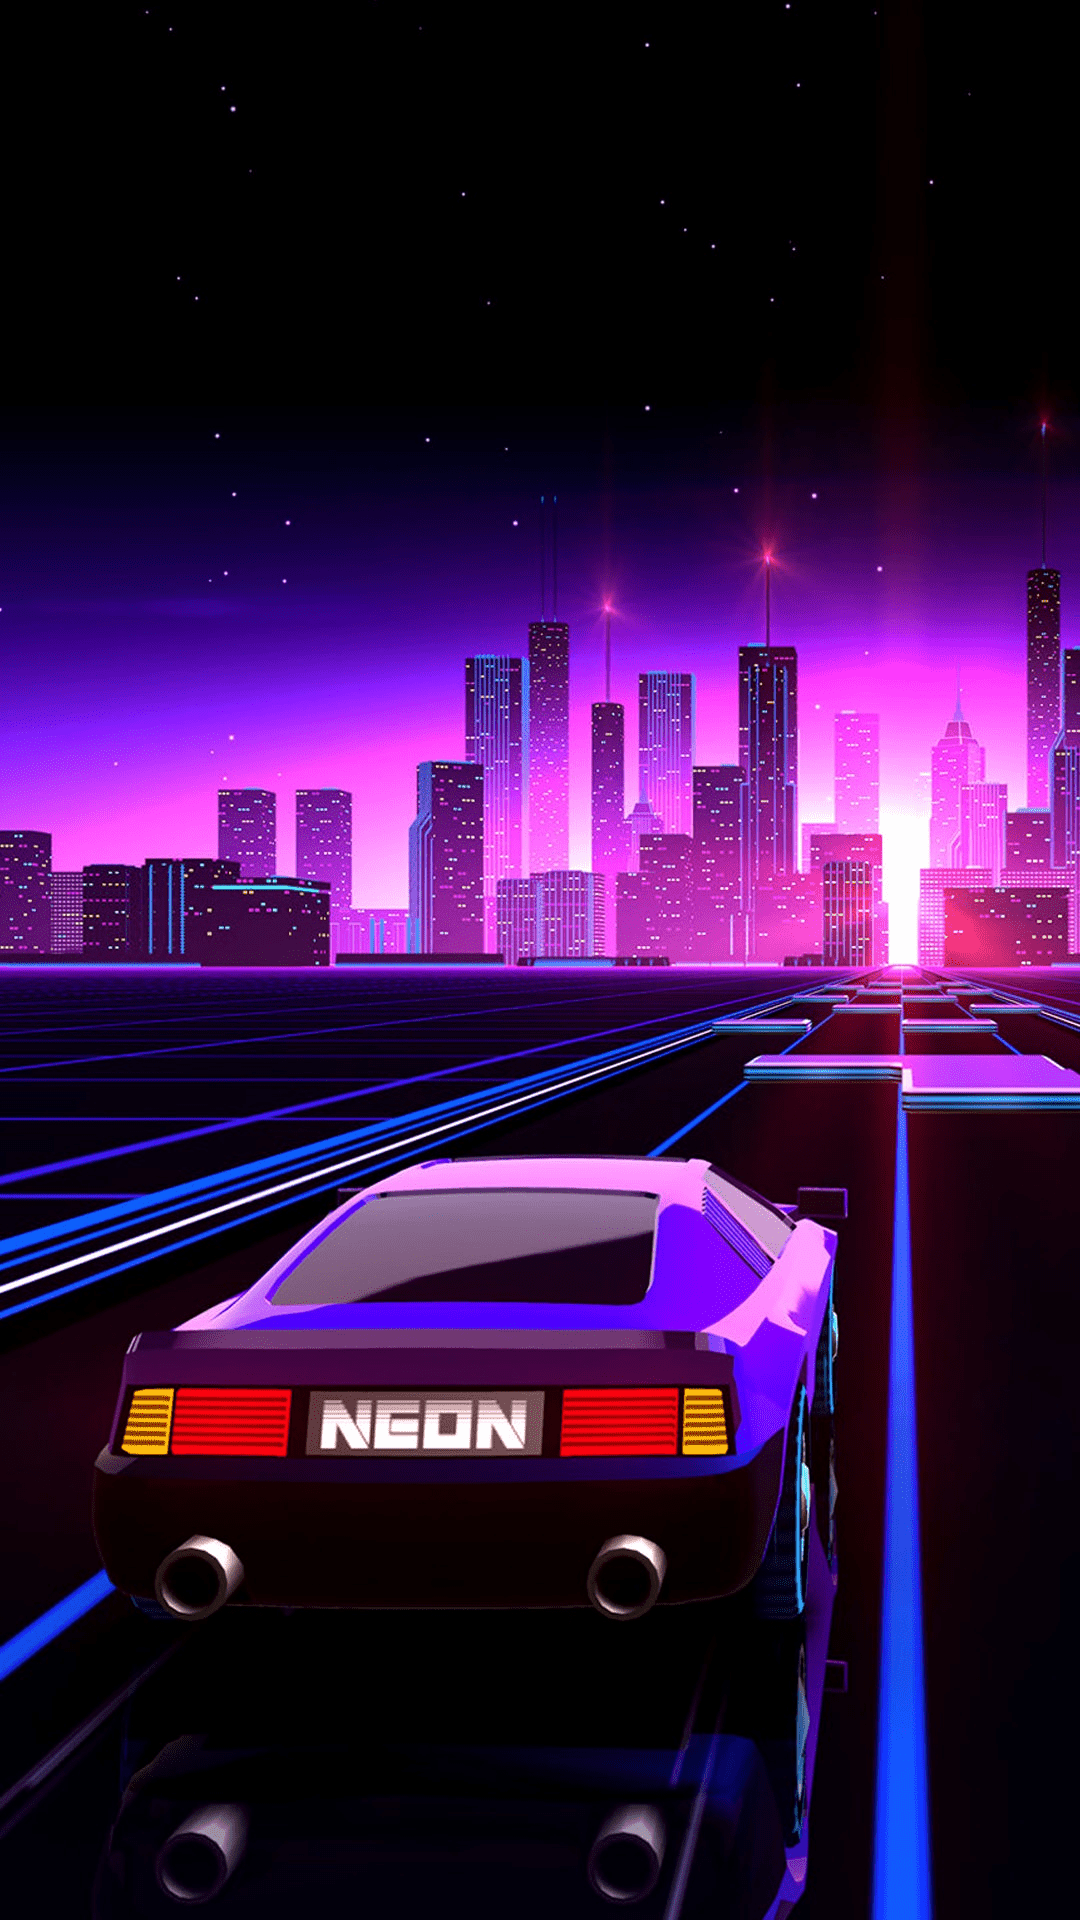 80s car on a highway - Synthwave, cars